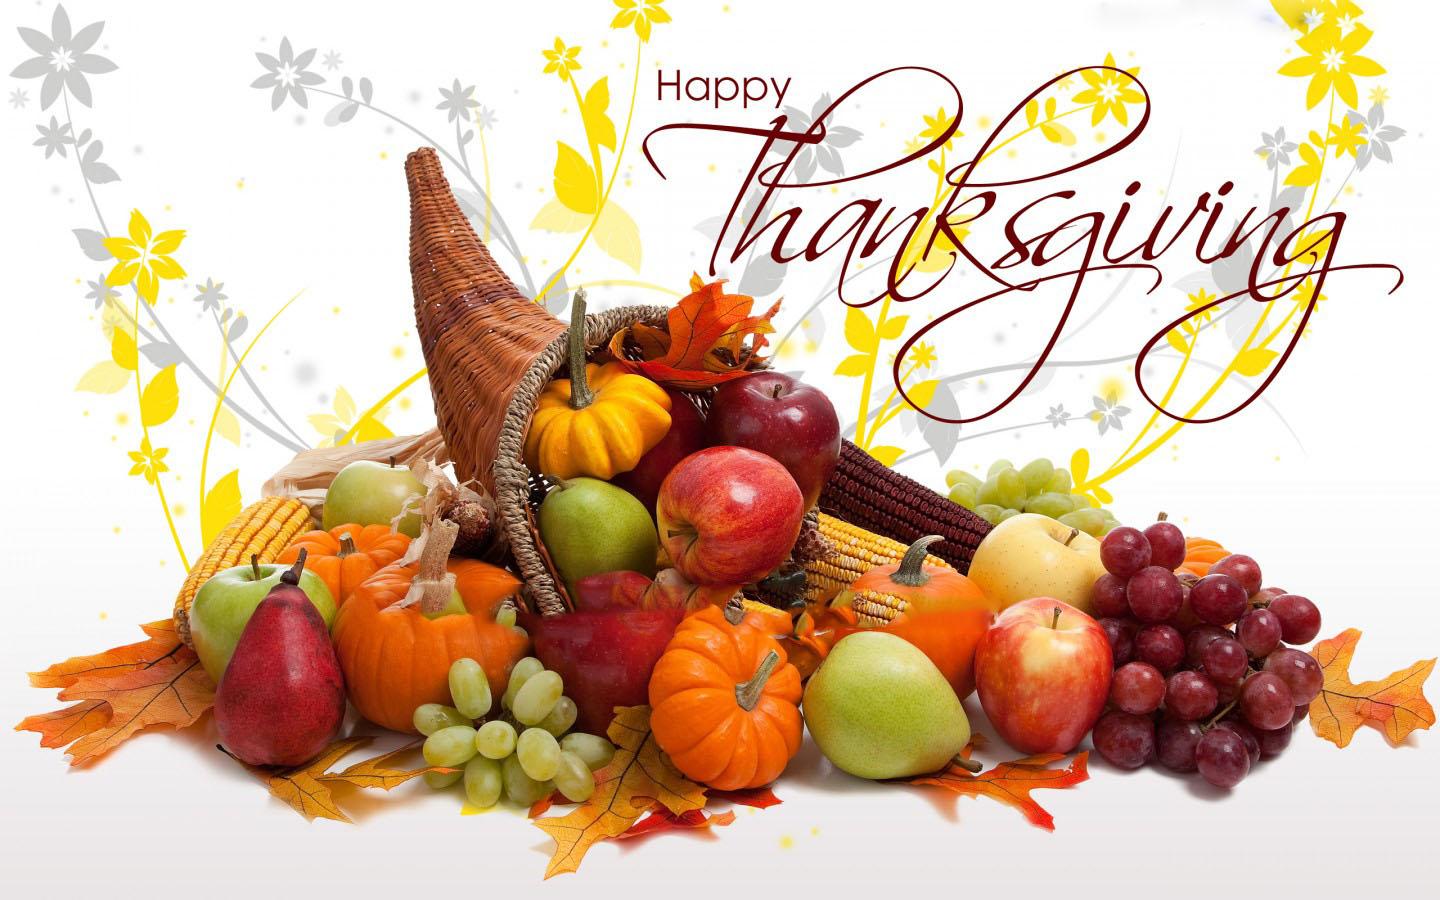 Thanksgiving Wallpaper - Android Apps on Google Play